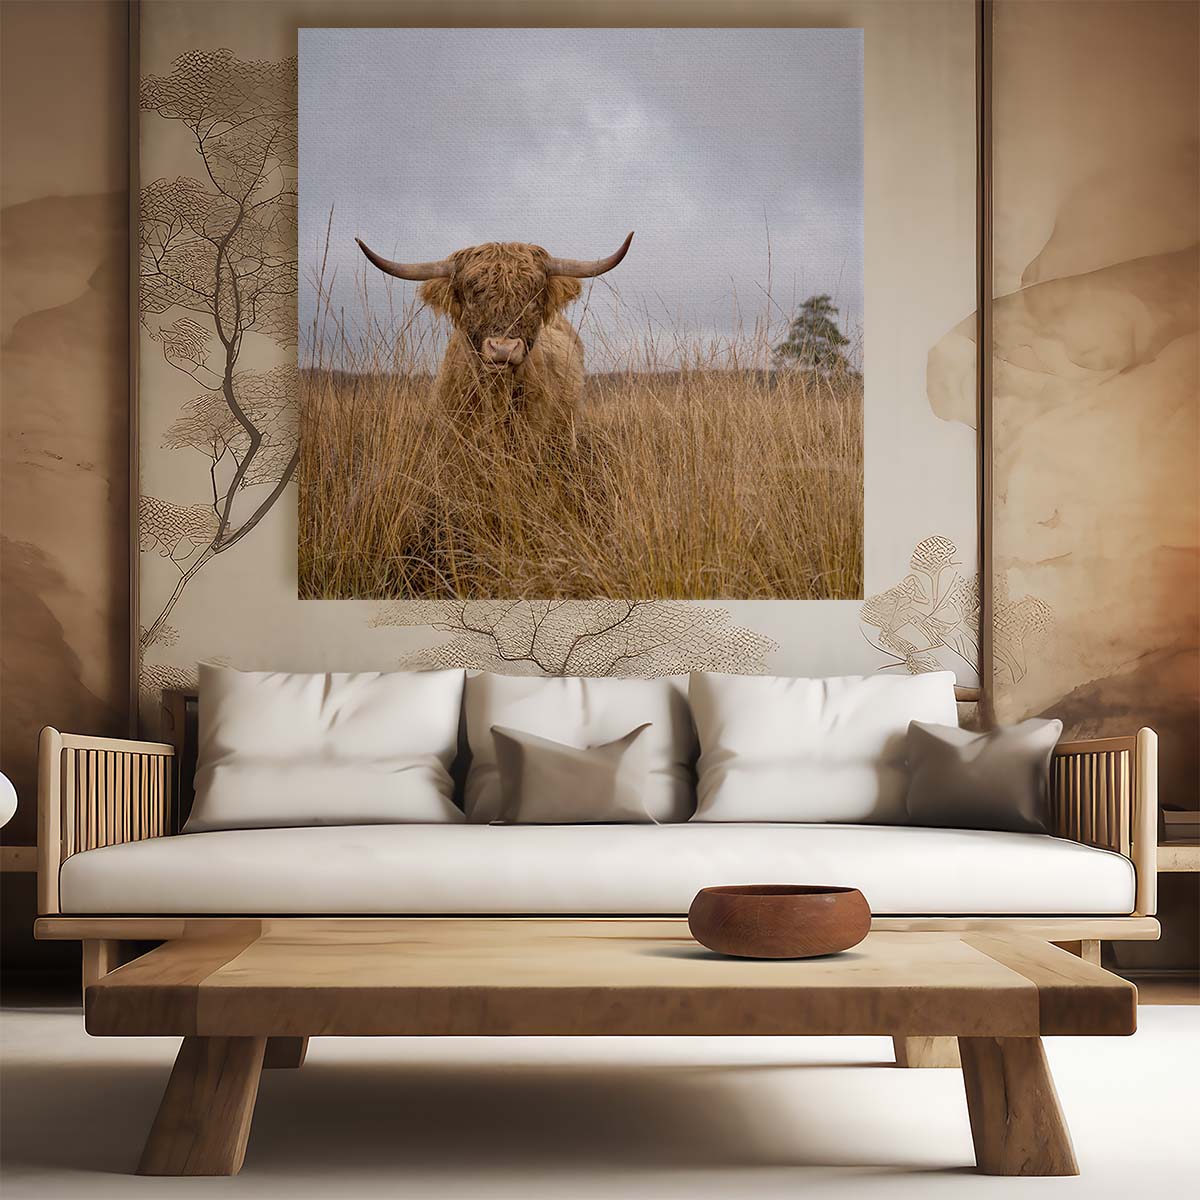 Rustic Farmhouse Highland Cow Landscape Photography Wall Art by Luxuriance Designs. Made in USA.